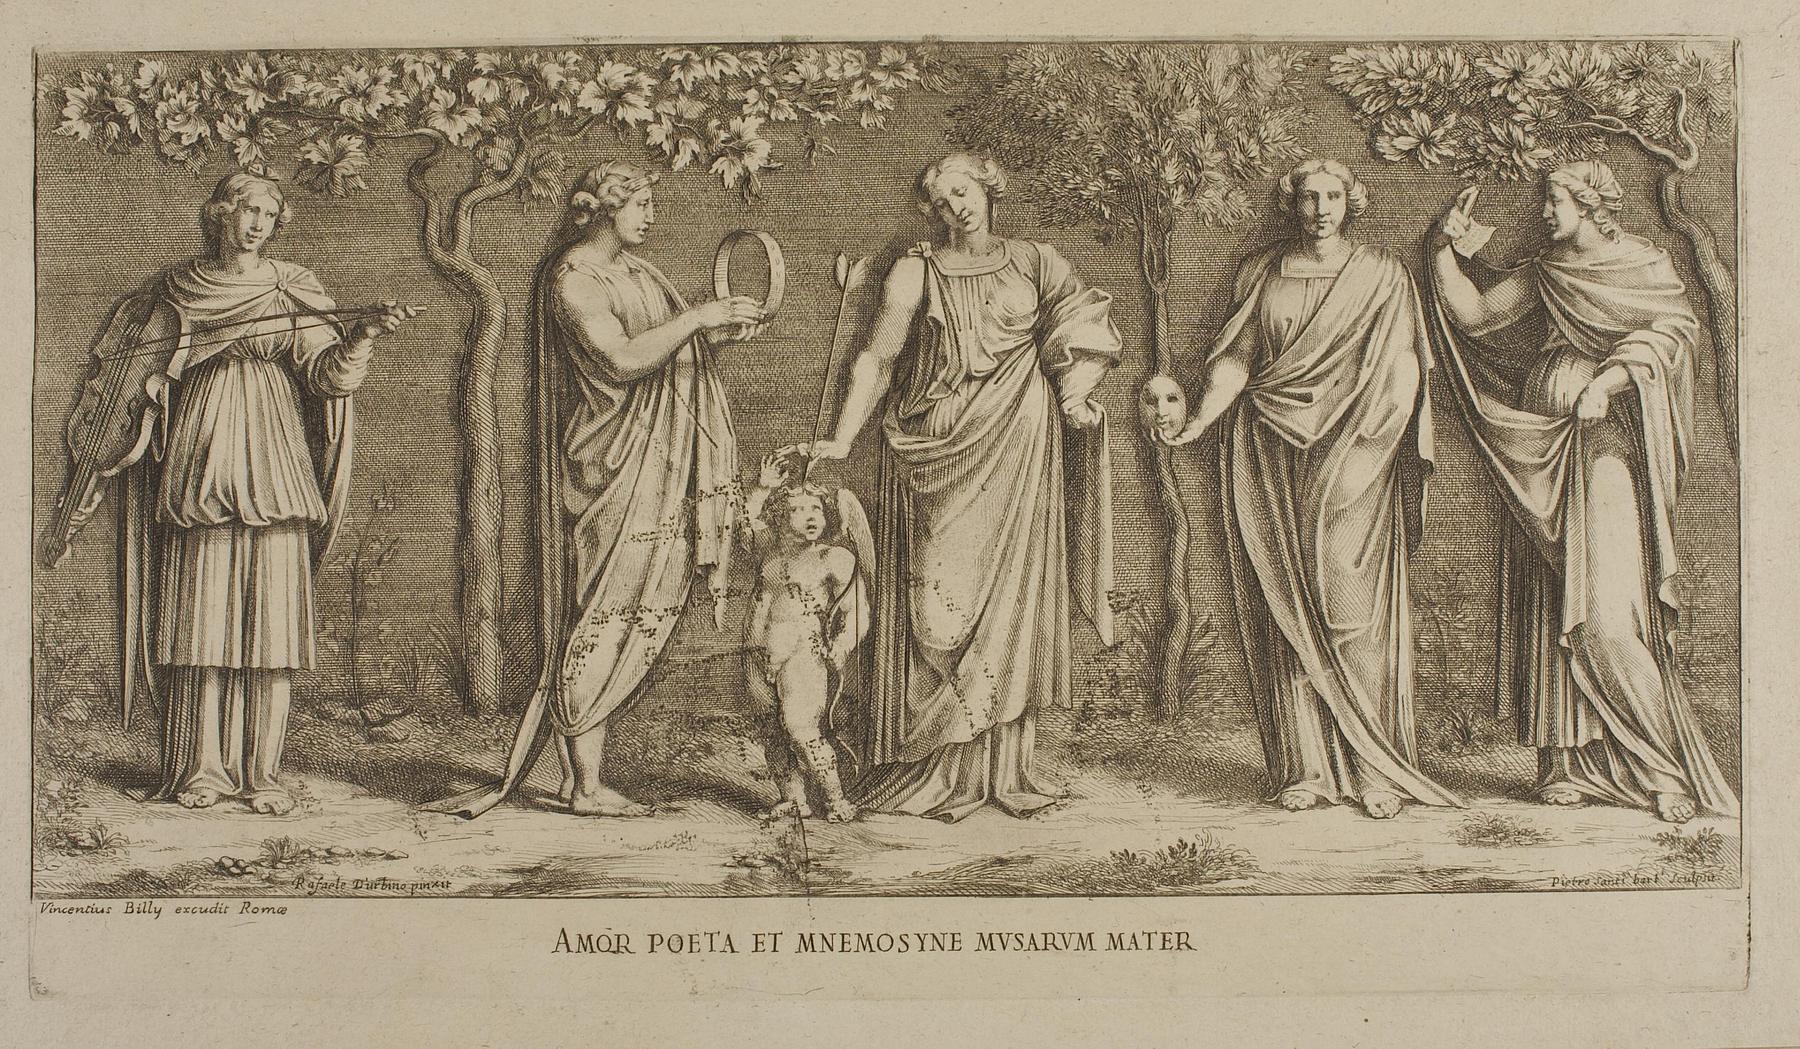 Amor Poeta et Mnemosyme Musarem mater (Cupid, Mnemosyne and Four other Muses), E297